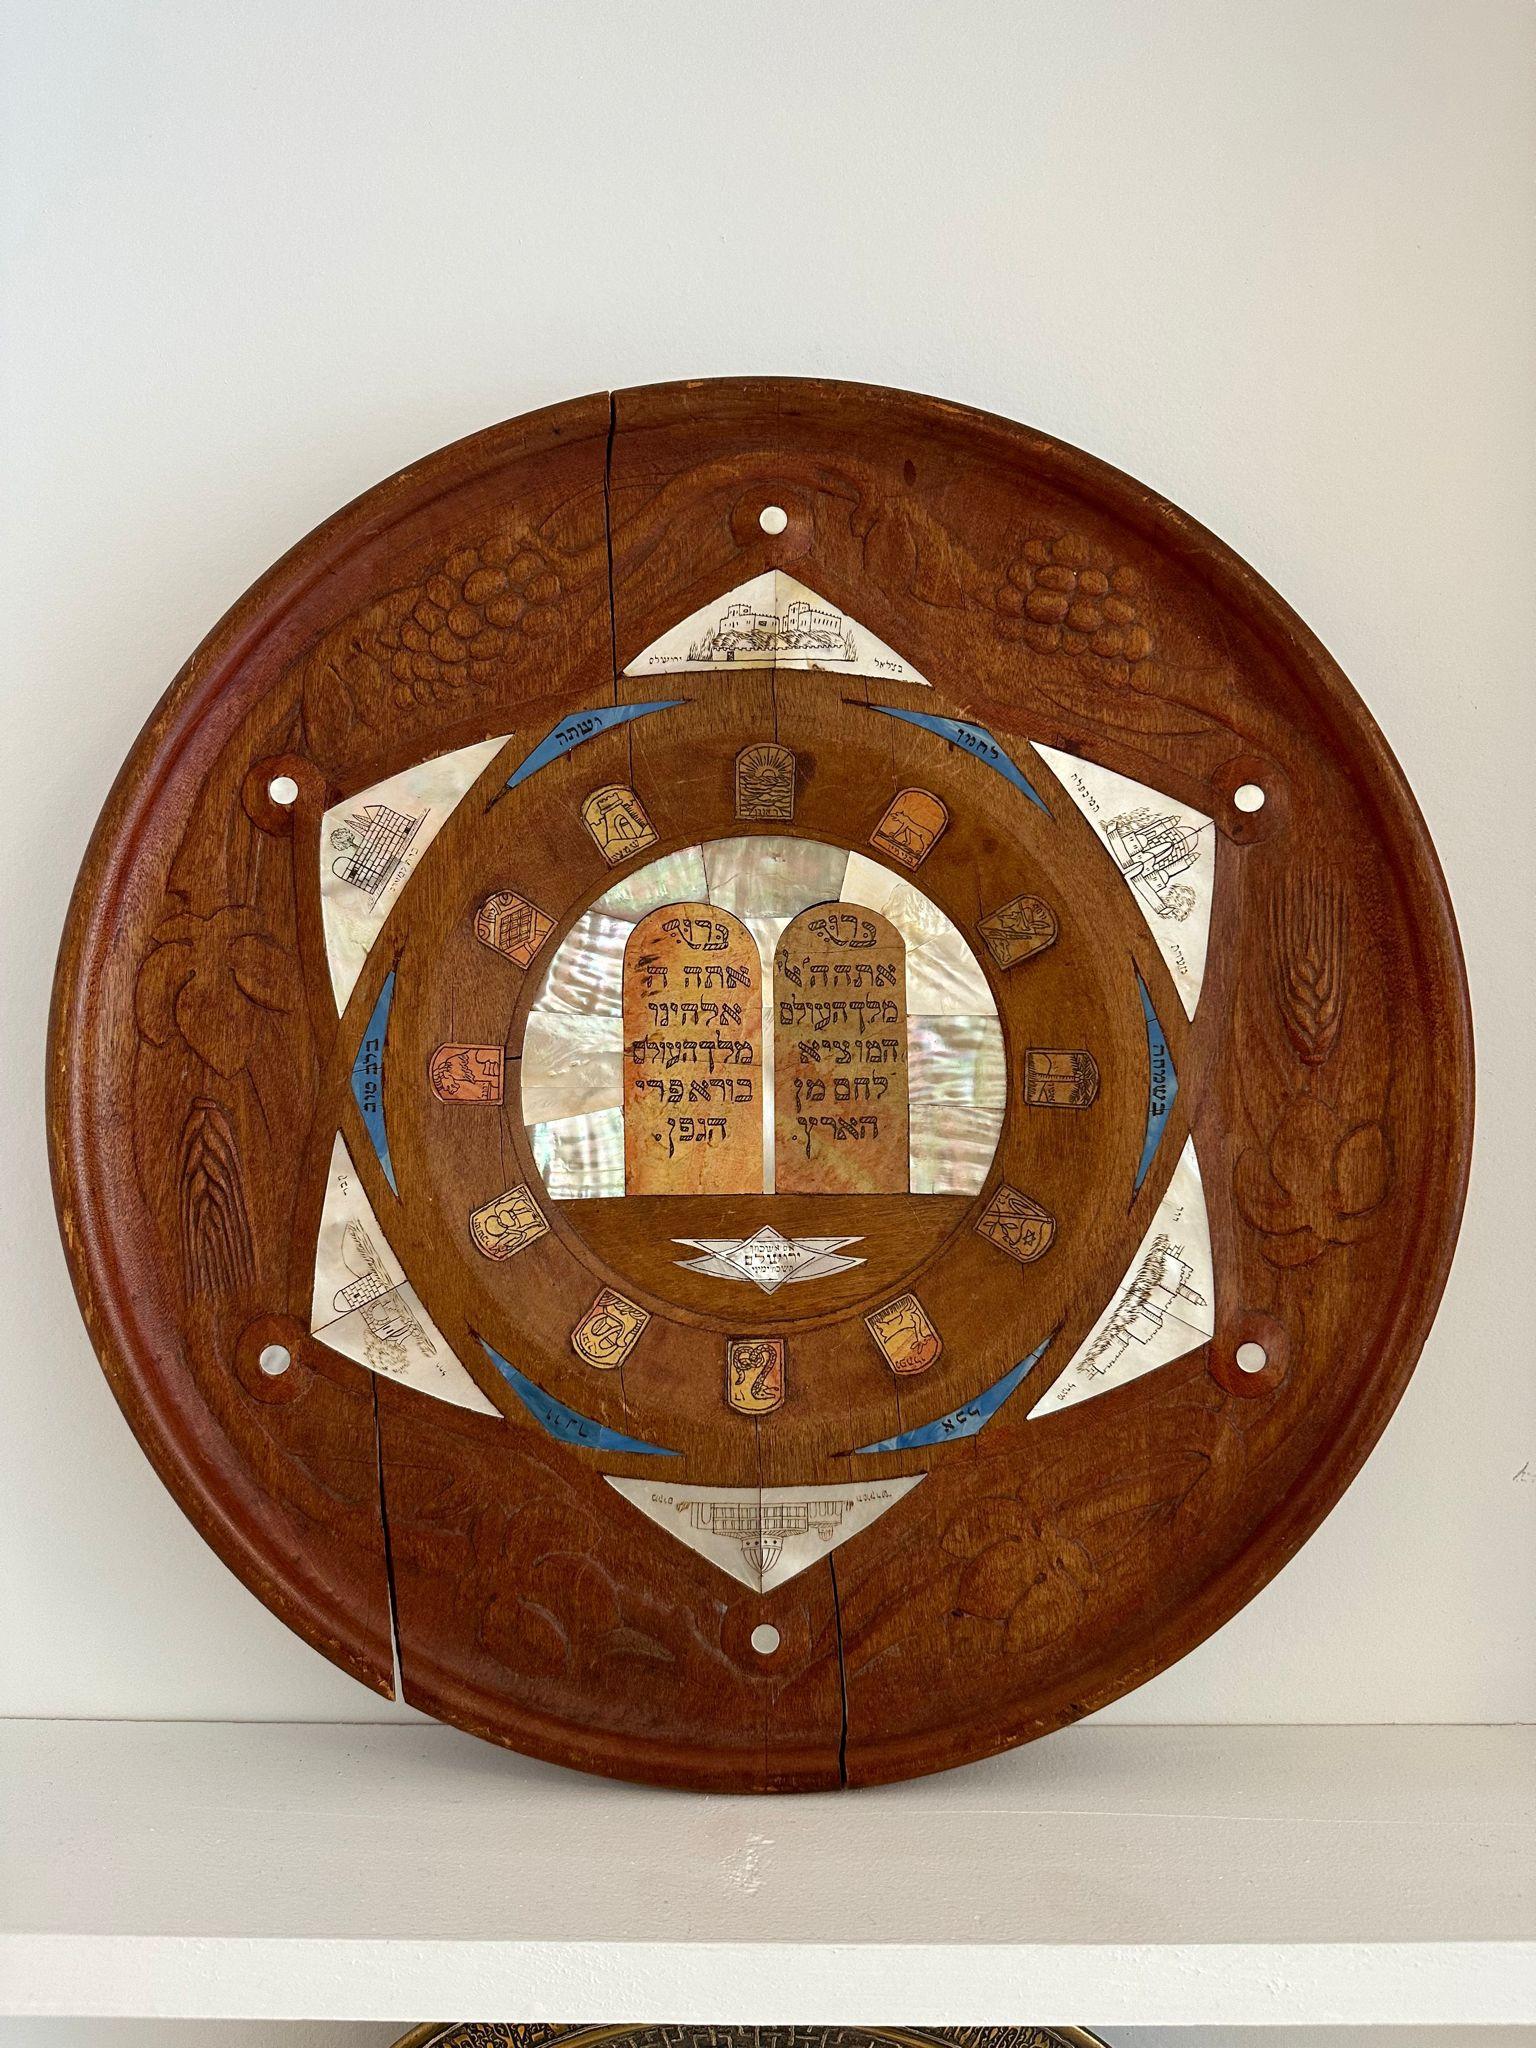 Early 20th century Bezalel Jerusalem wooden tray inlaid with Jerusalem stone and mother of pearl. 
The large tray is carved with the Seven Species on its margins, while the center is inlaid with Jerusalem stone plaques shaped as the Tablets of the